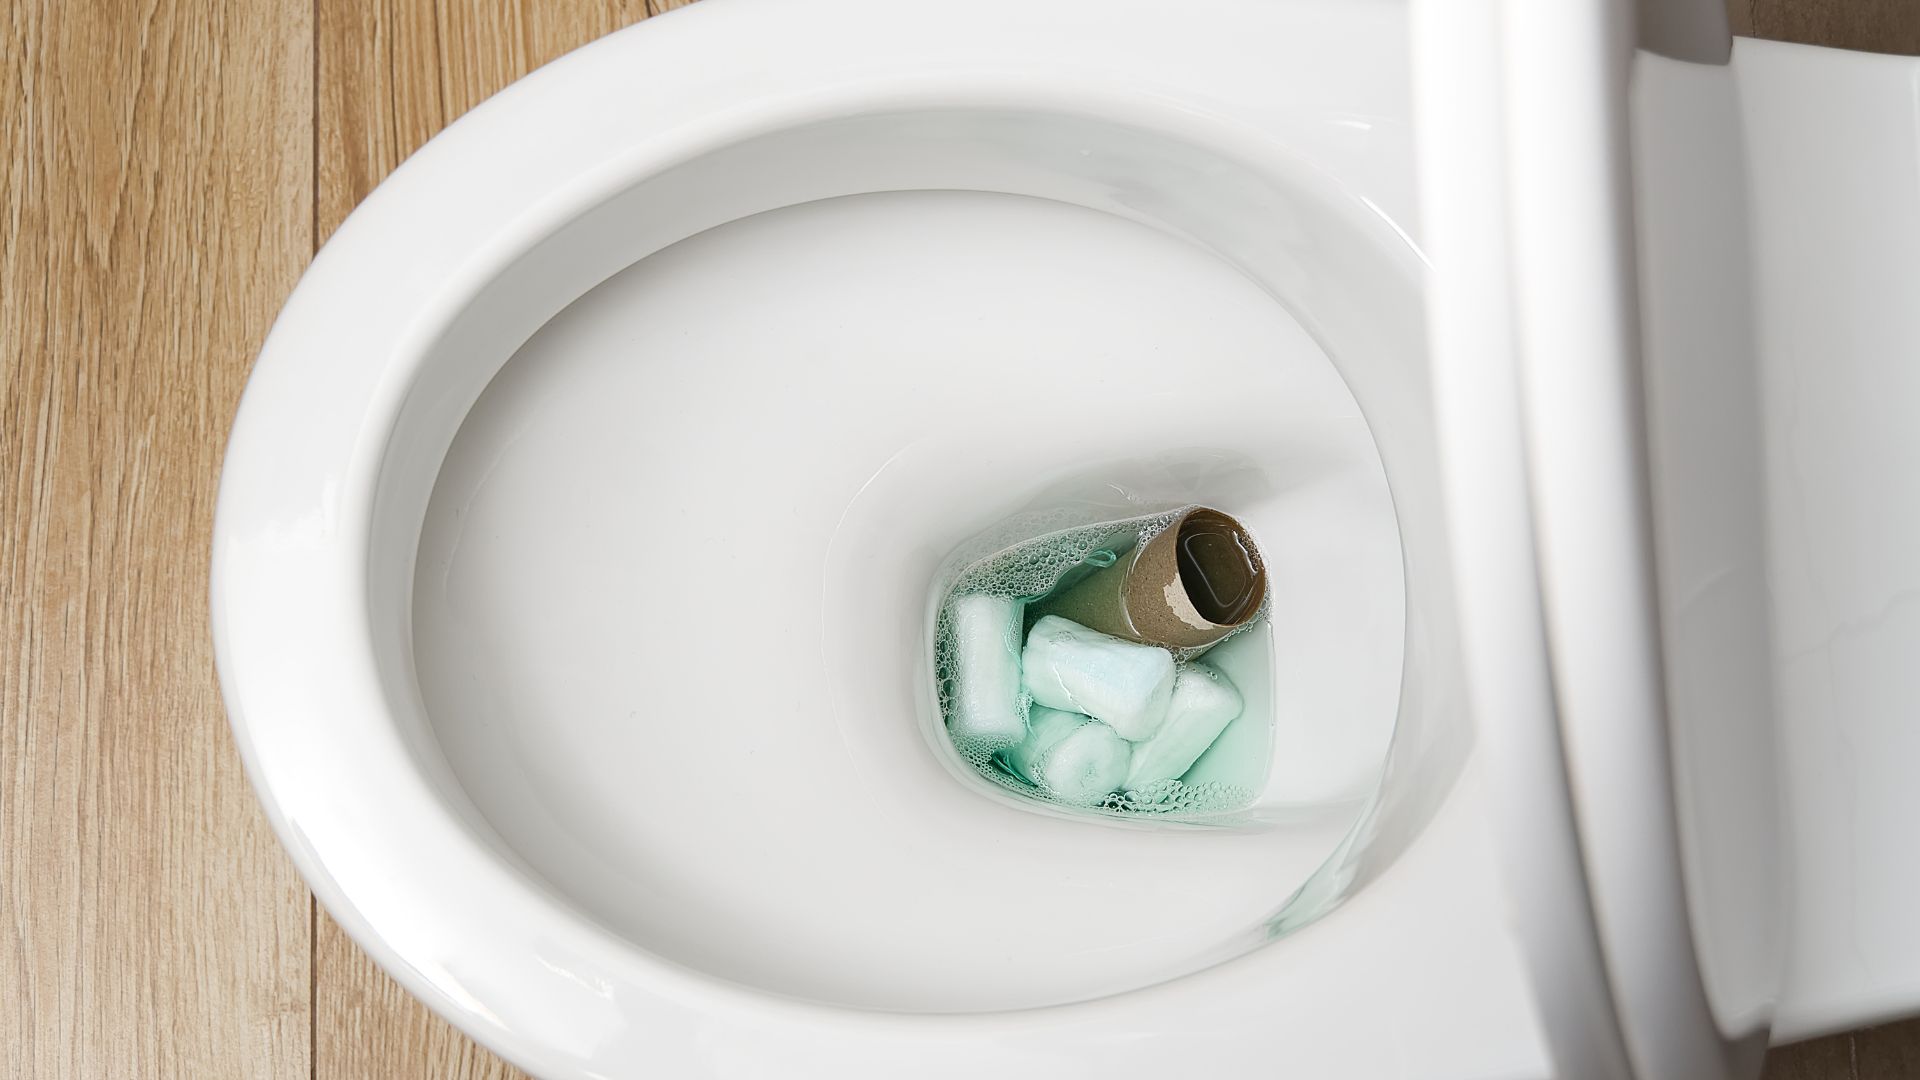 Plumbers Explain Common Reasons for a Clogged Toilet